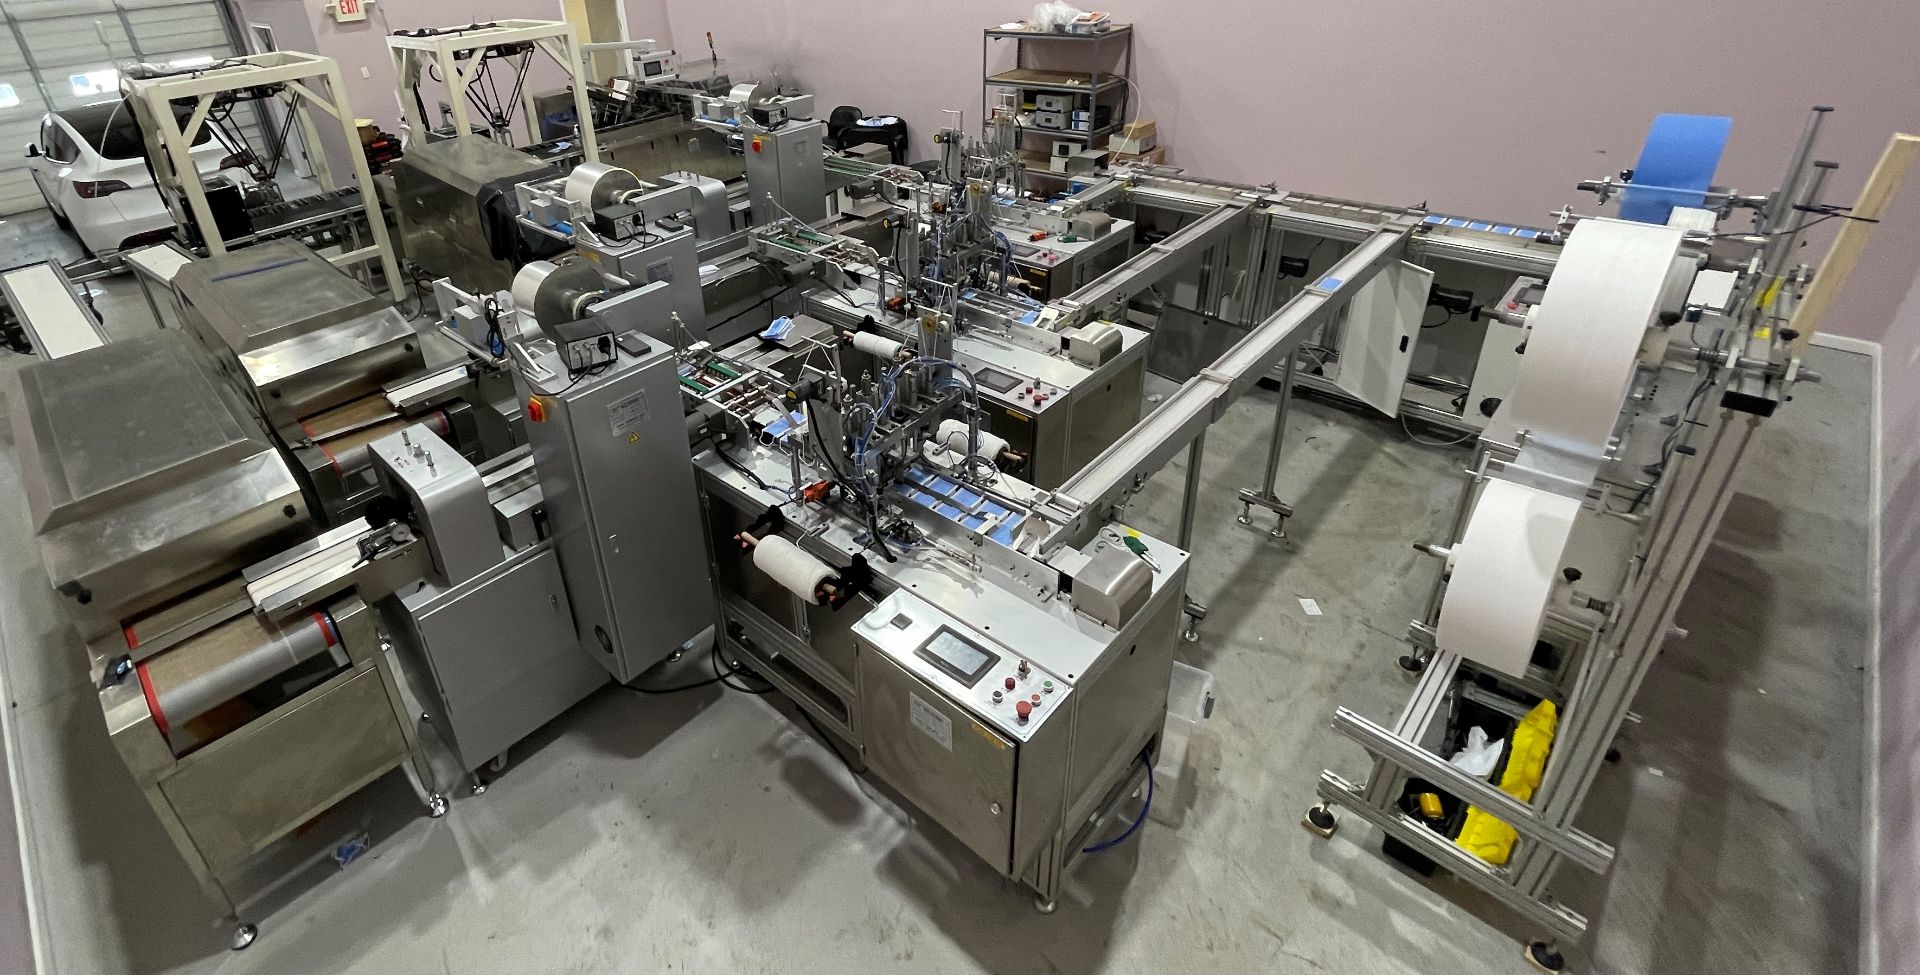 COMPLETE PACKAGE: 2020 3-Ply Disposable Medical Mask Assembly & Packaging Line Equipment, Includes: - Image 27 of 150